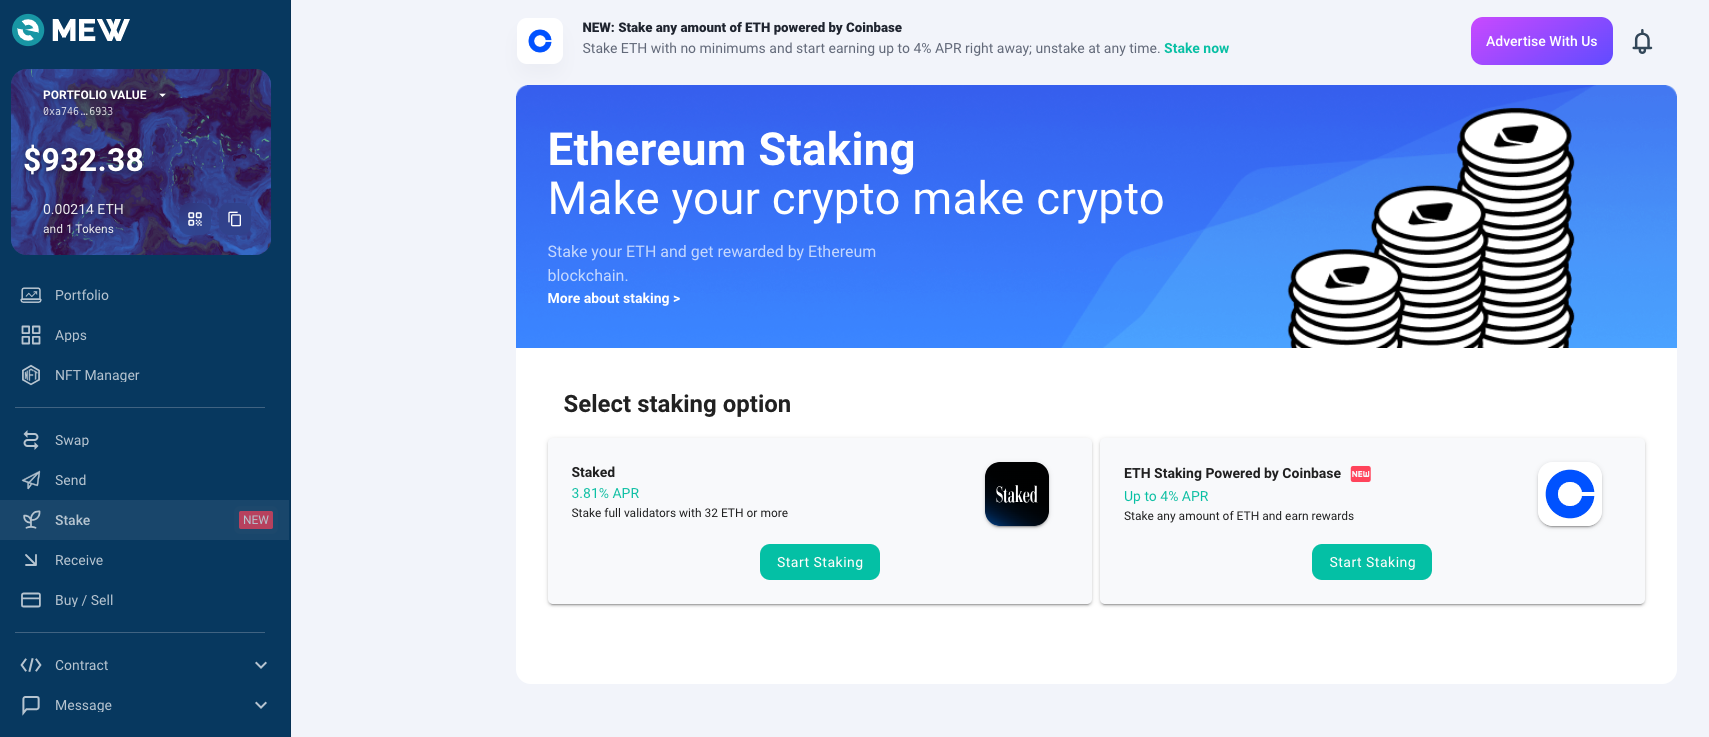 ETH Staking in MEW, Powered by Coinbase Cloud